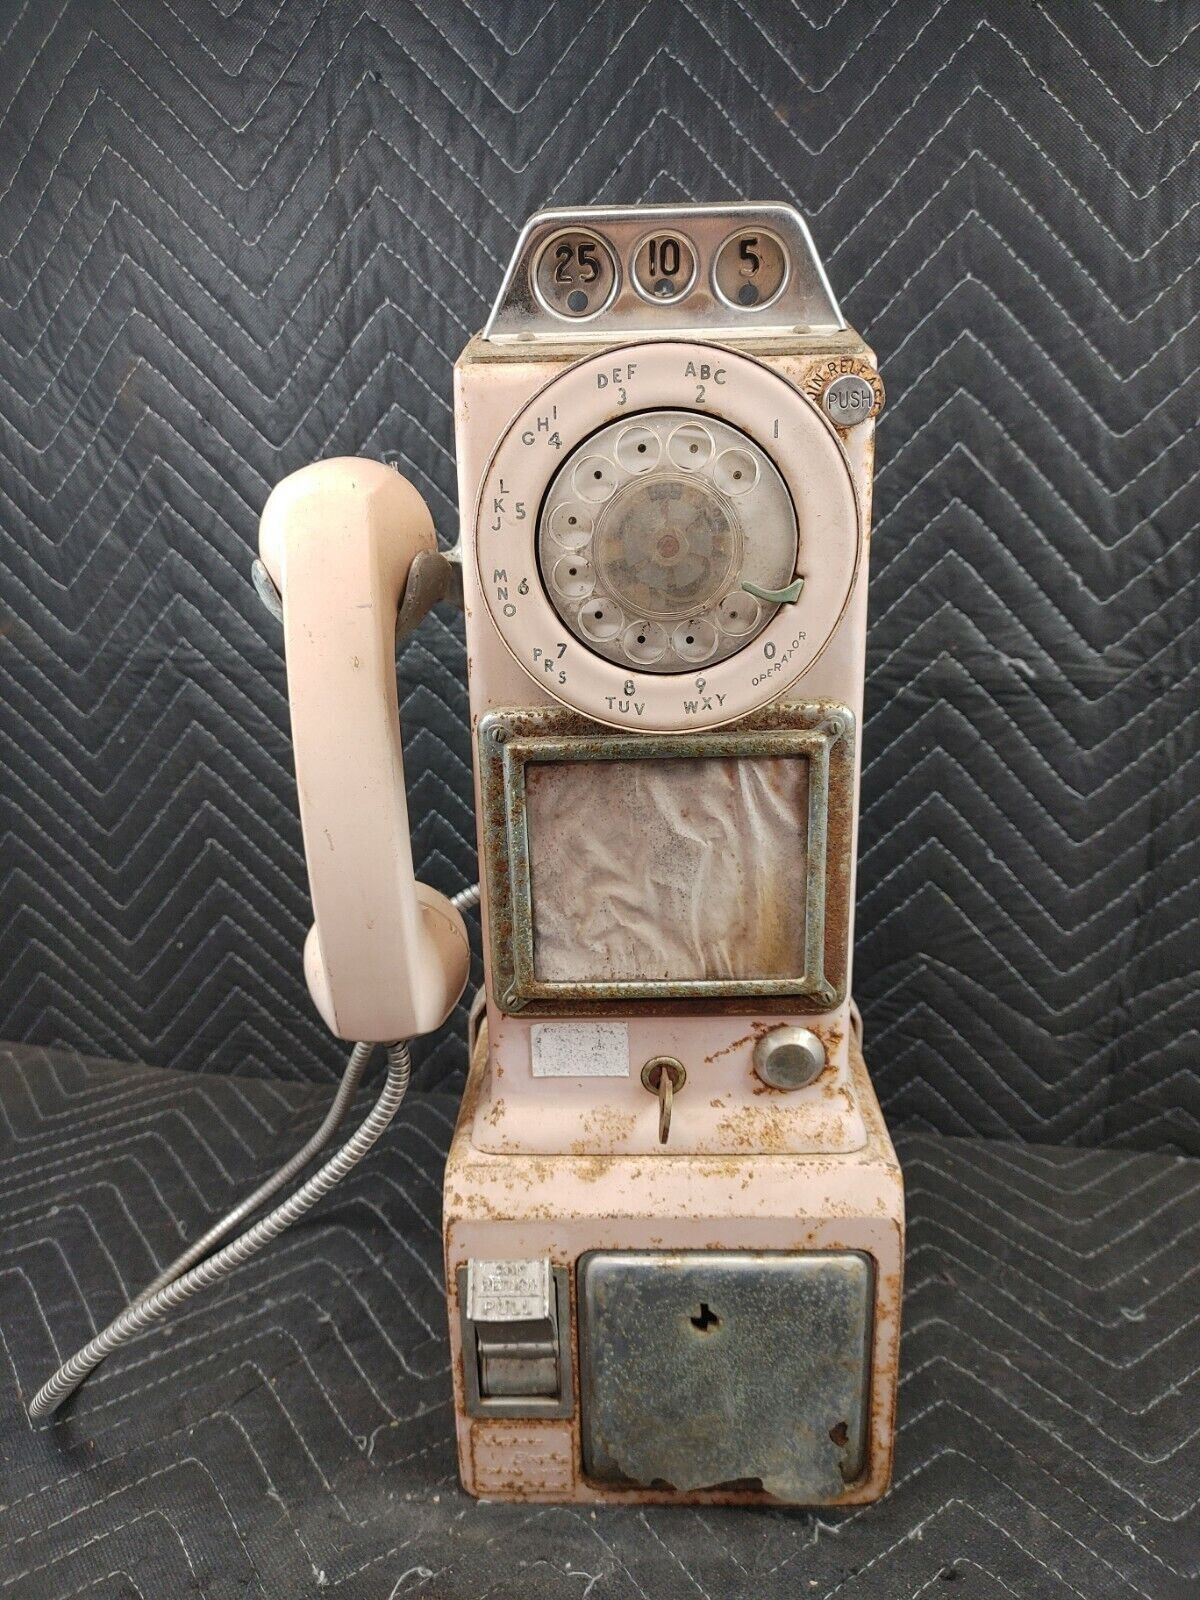 Vintage 3 Slot Rotary Northern Electric Payphone 1969 w/ key